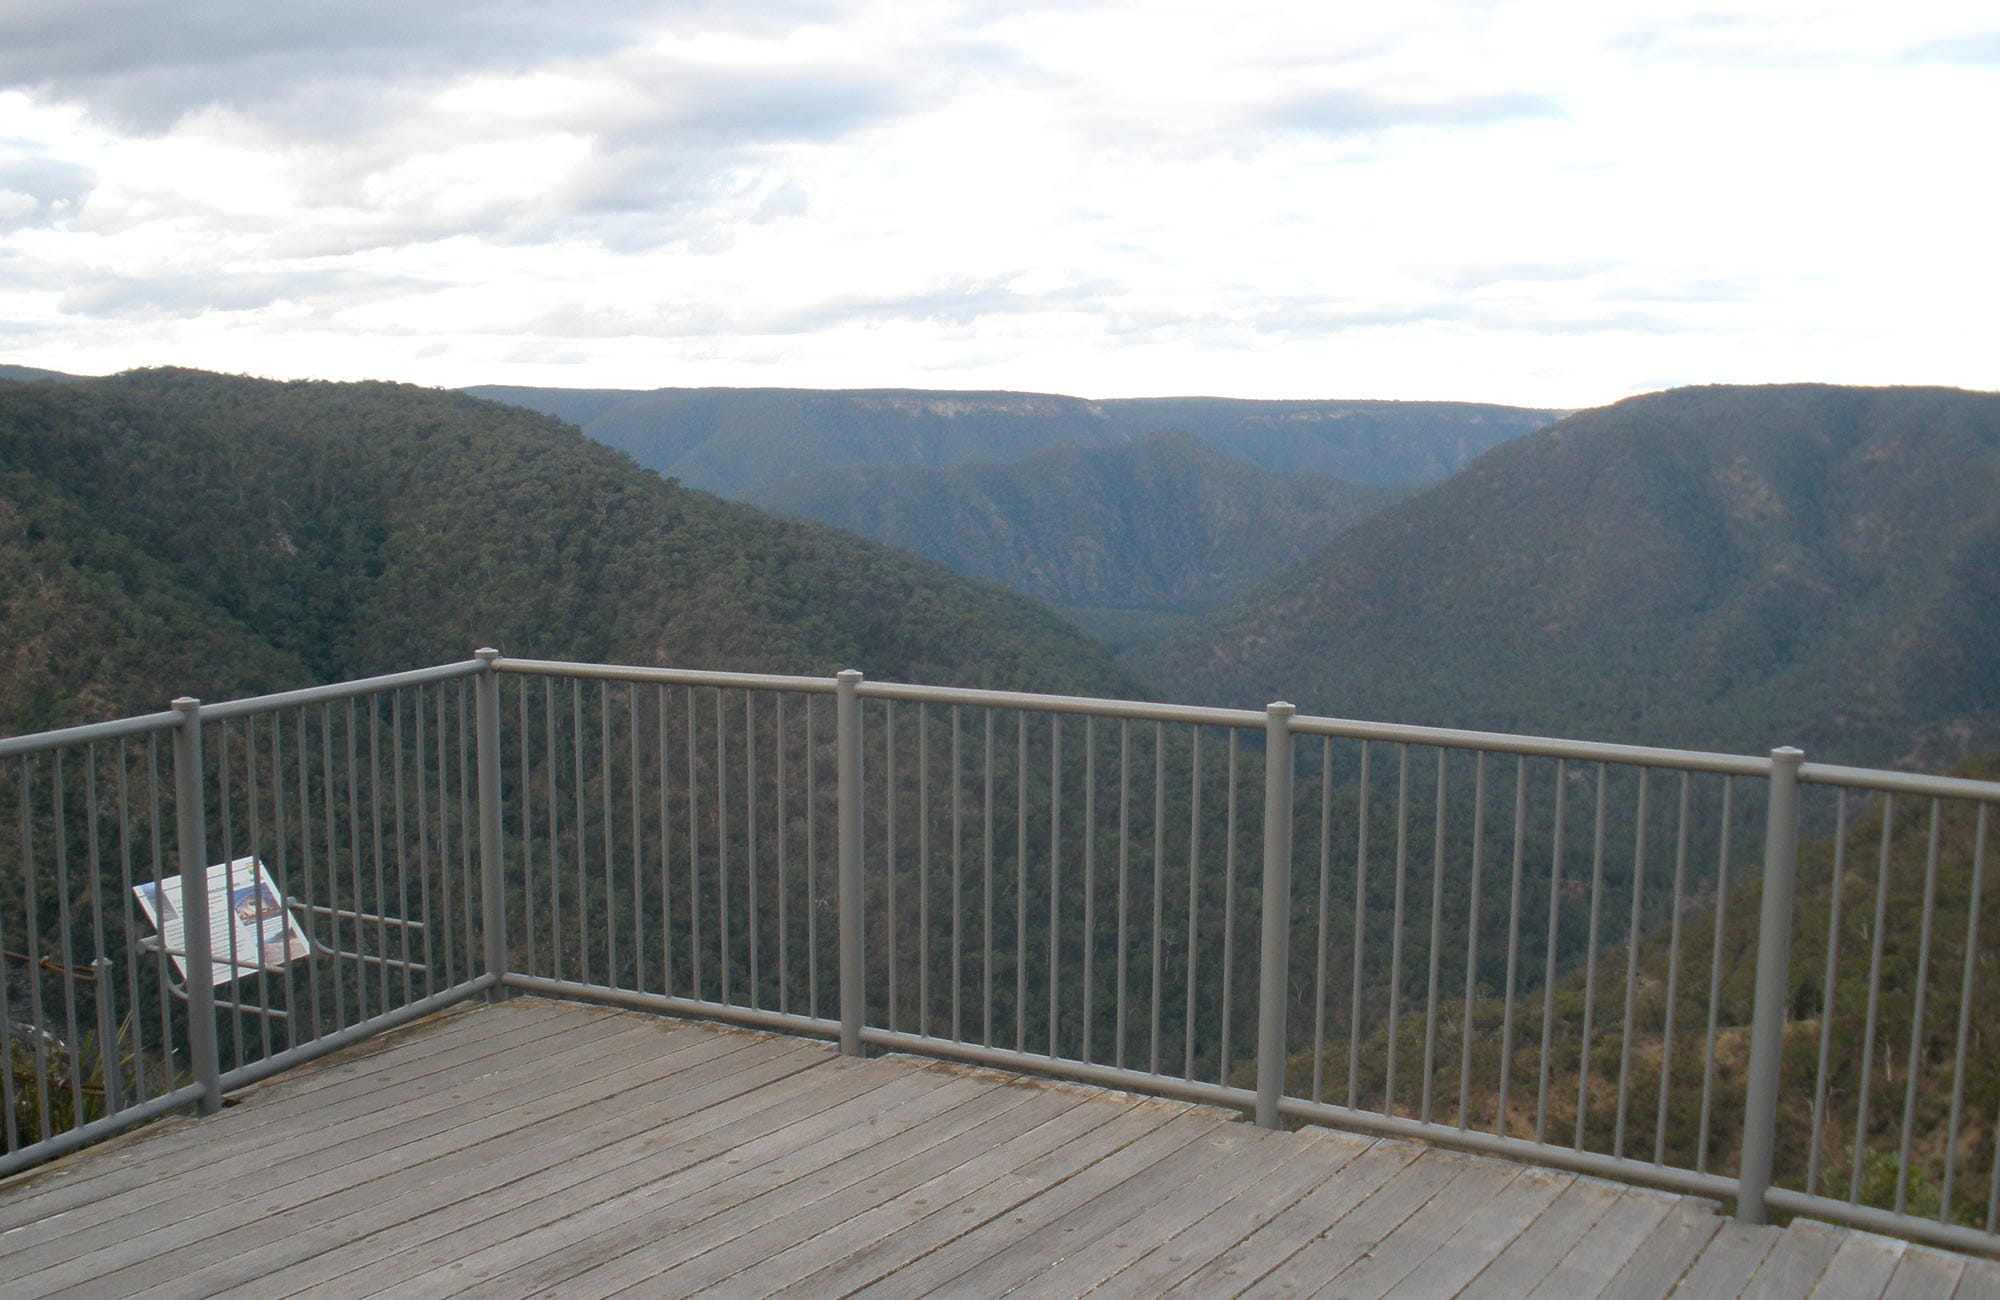 Lookdown Lookout, Bungonia National Park. Photo: Audrey Kutzner/NSW Government